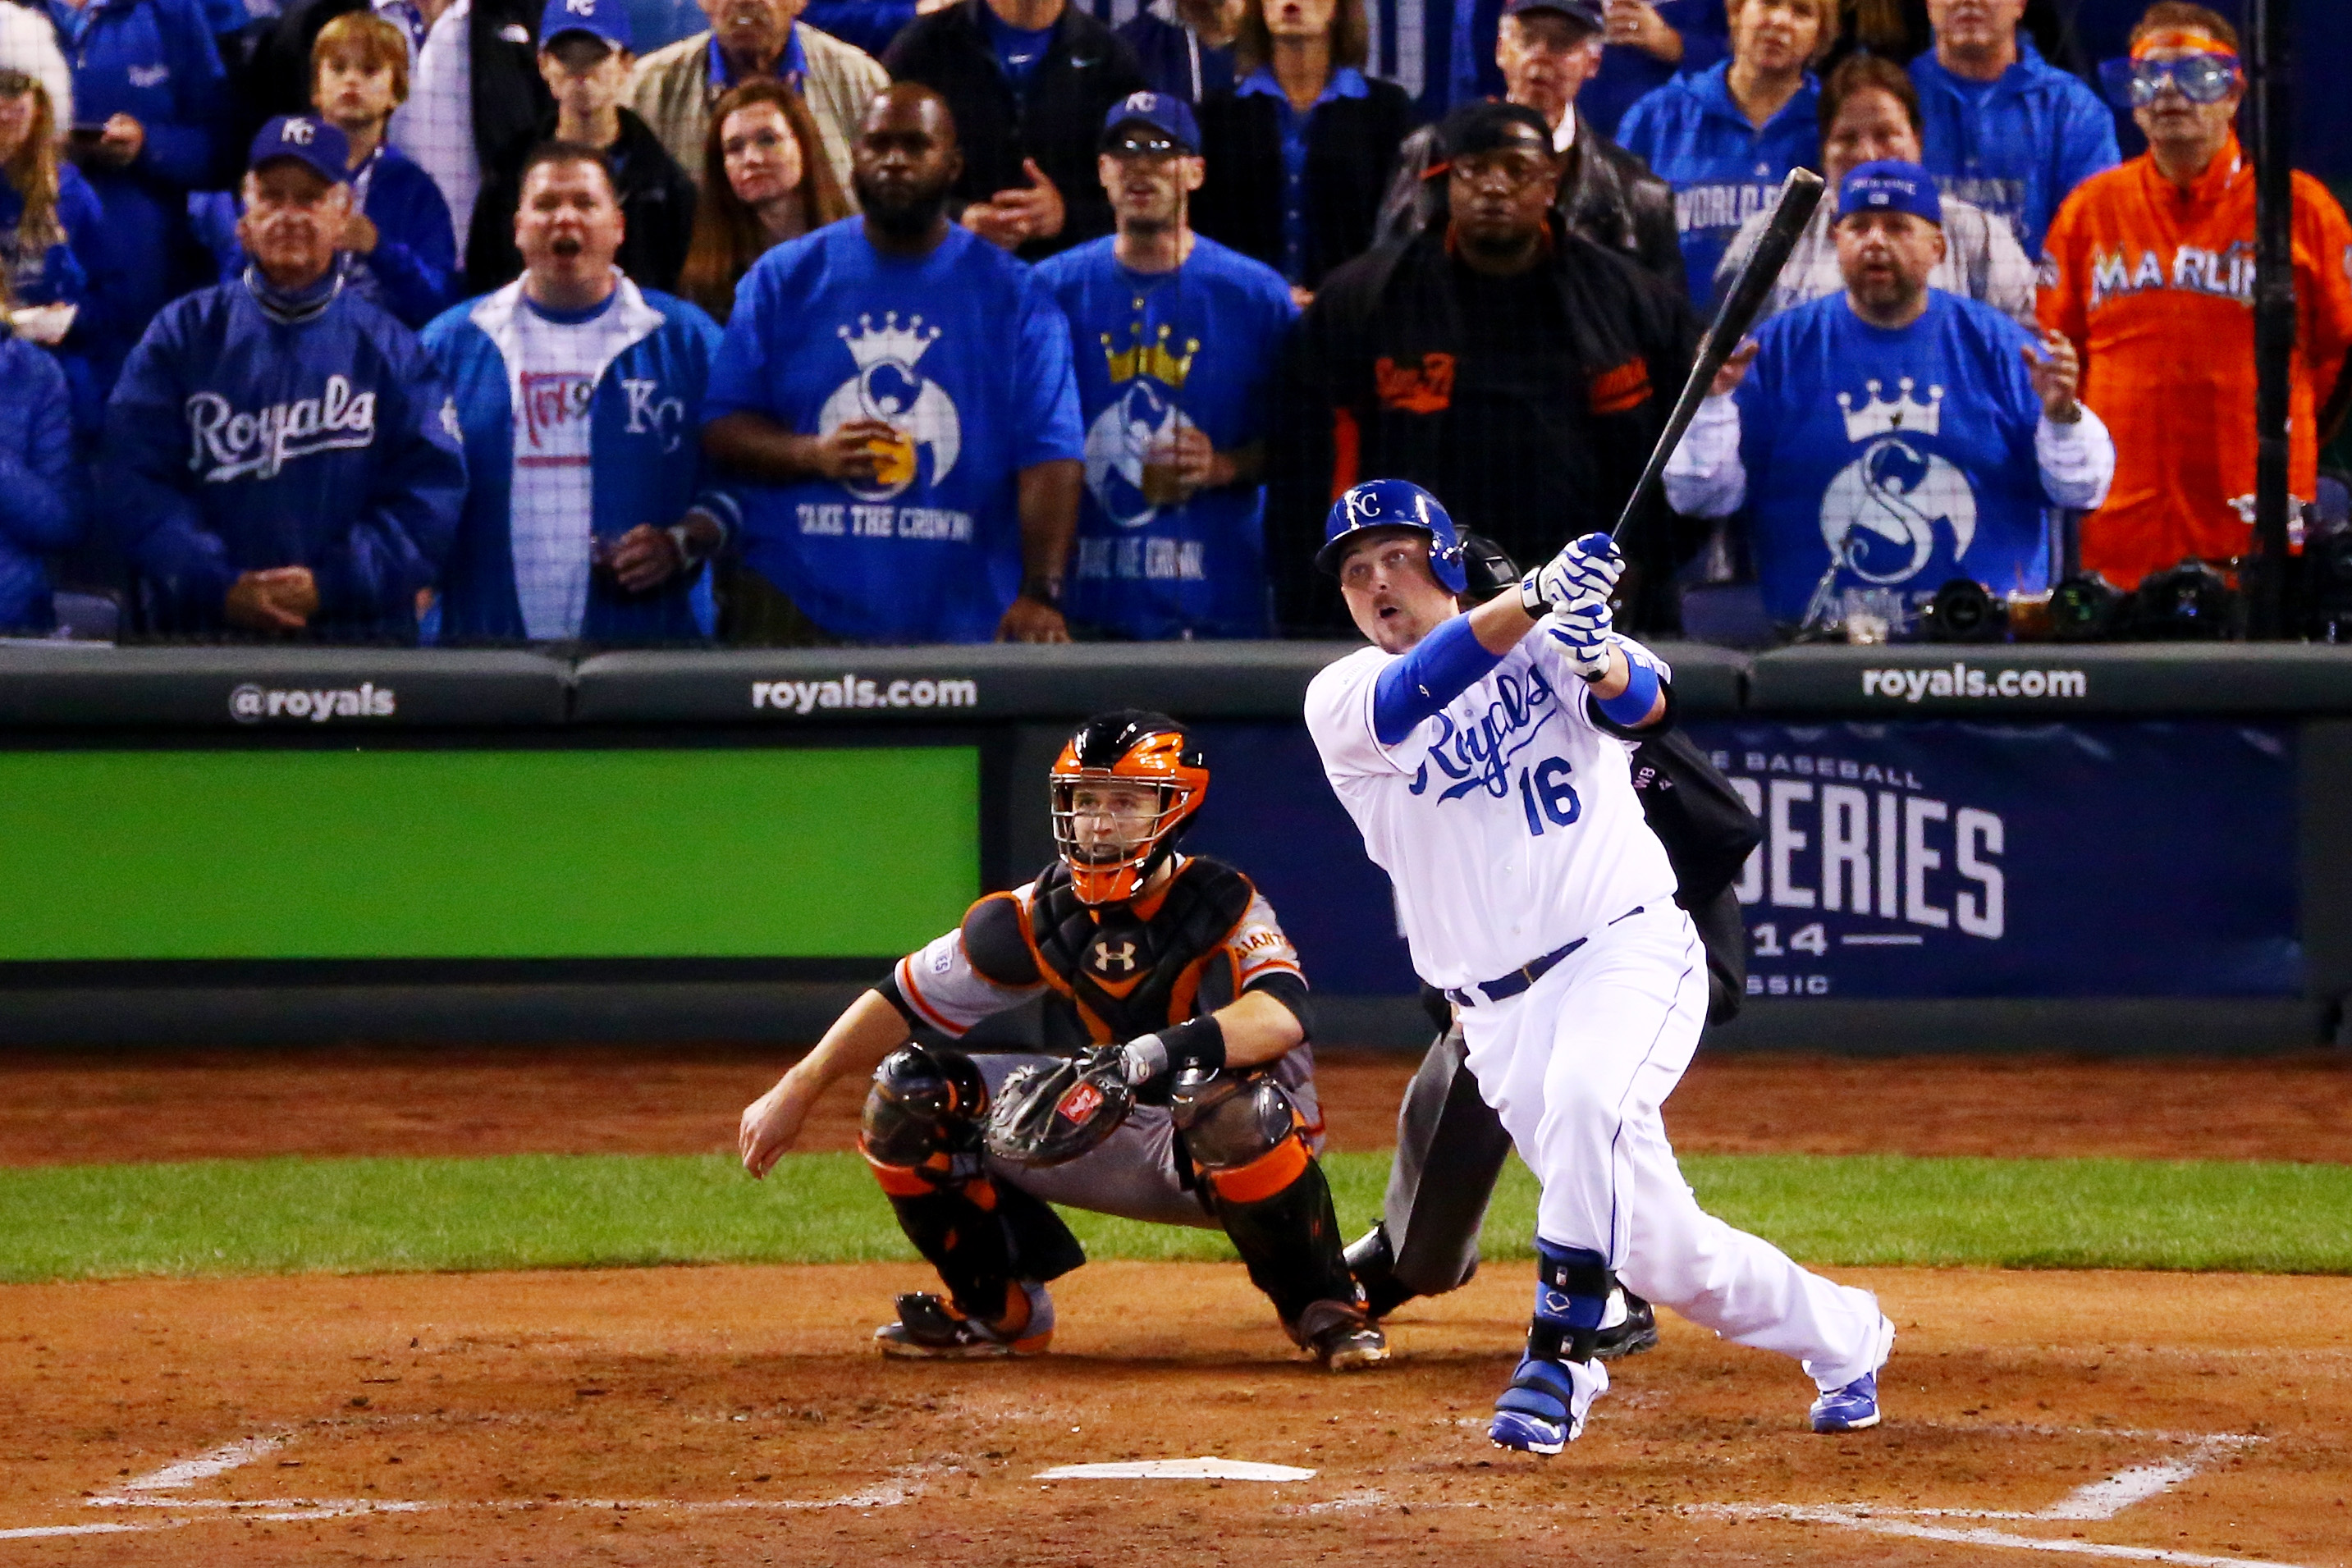 Billy Butler #16 of the Kansas City Royals hits an RBI double in the second inning against the San Francisco Giants during Game Six of the 2014 World Series at Kauffman Stadium on October 28, 2014 in Kansas City, Missouri.